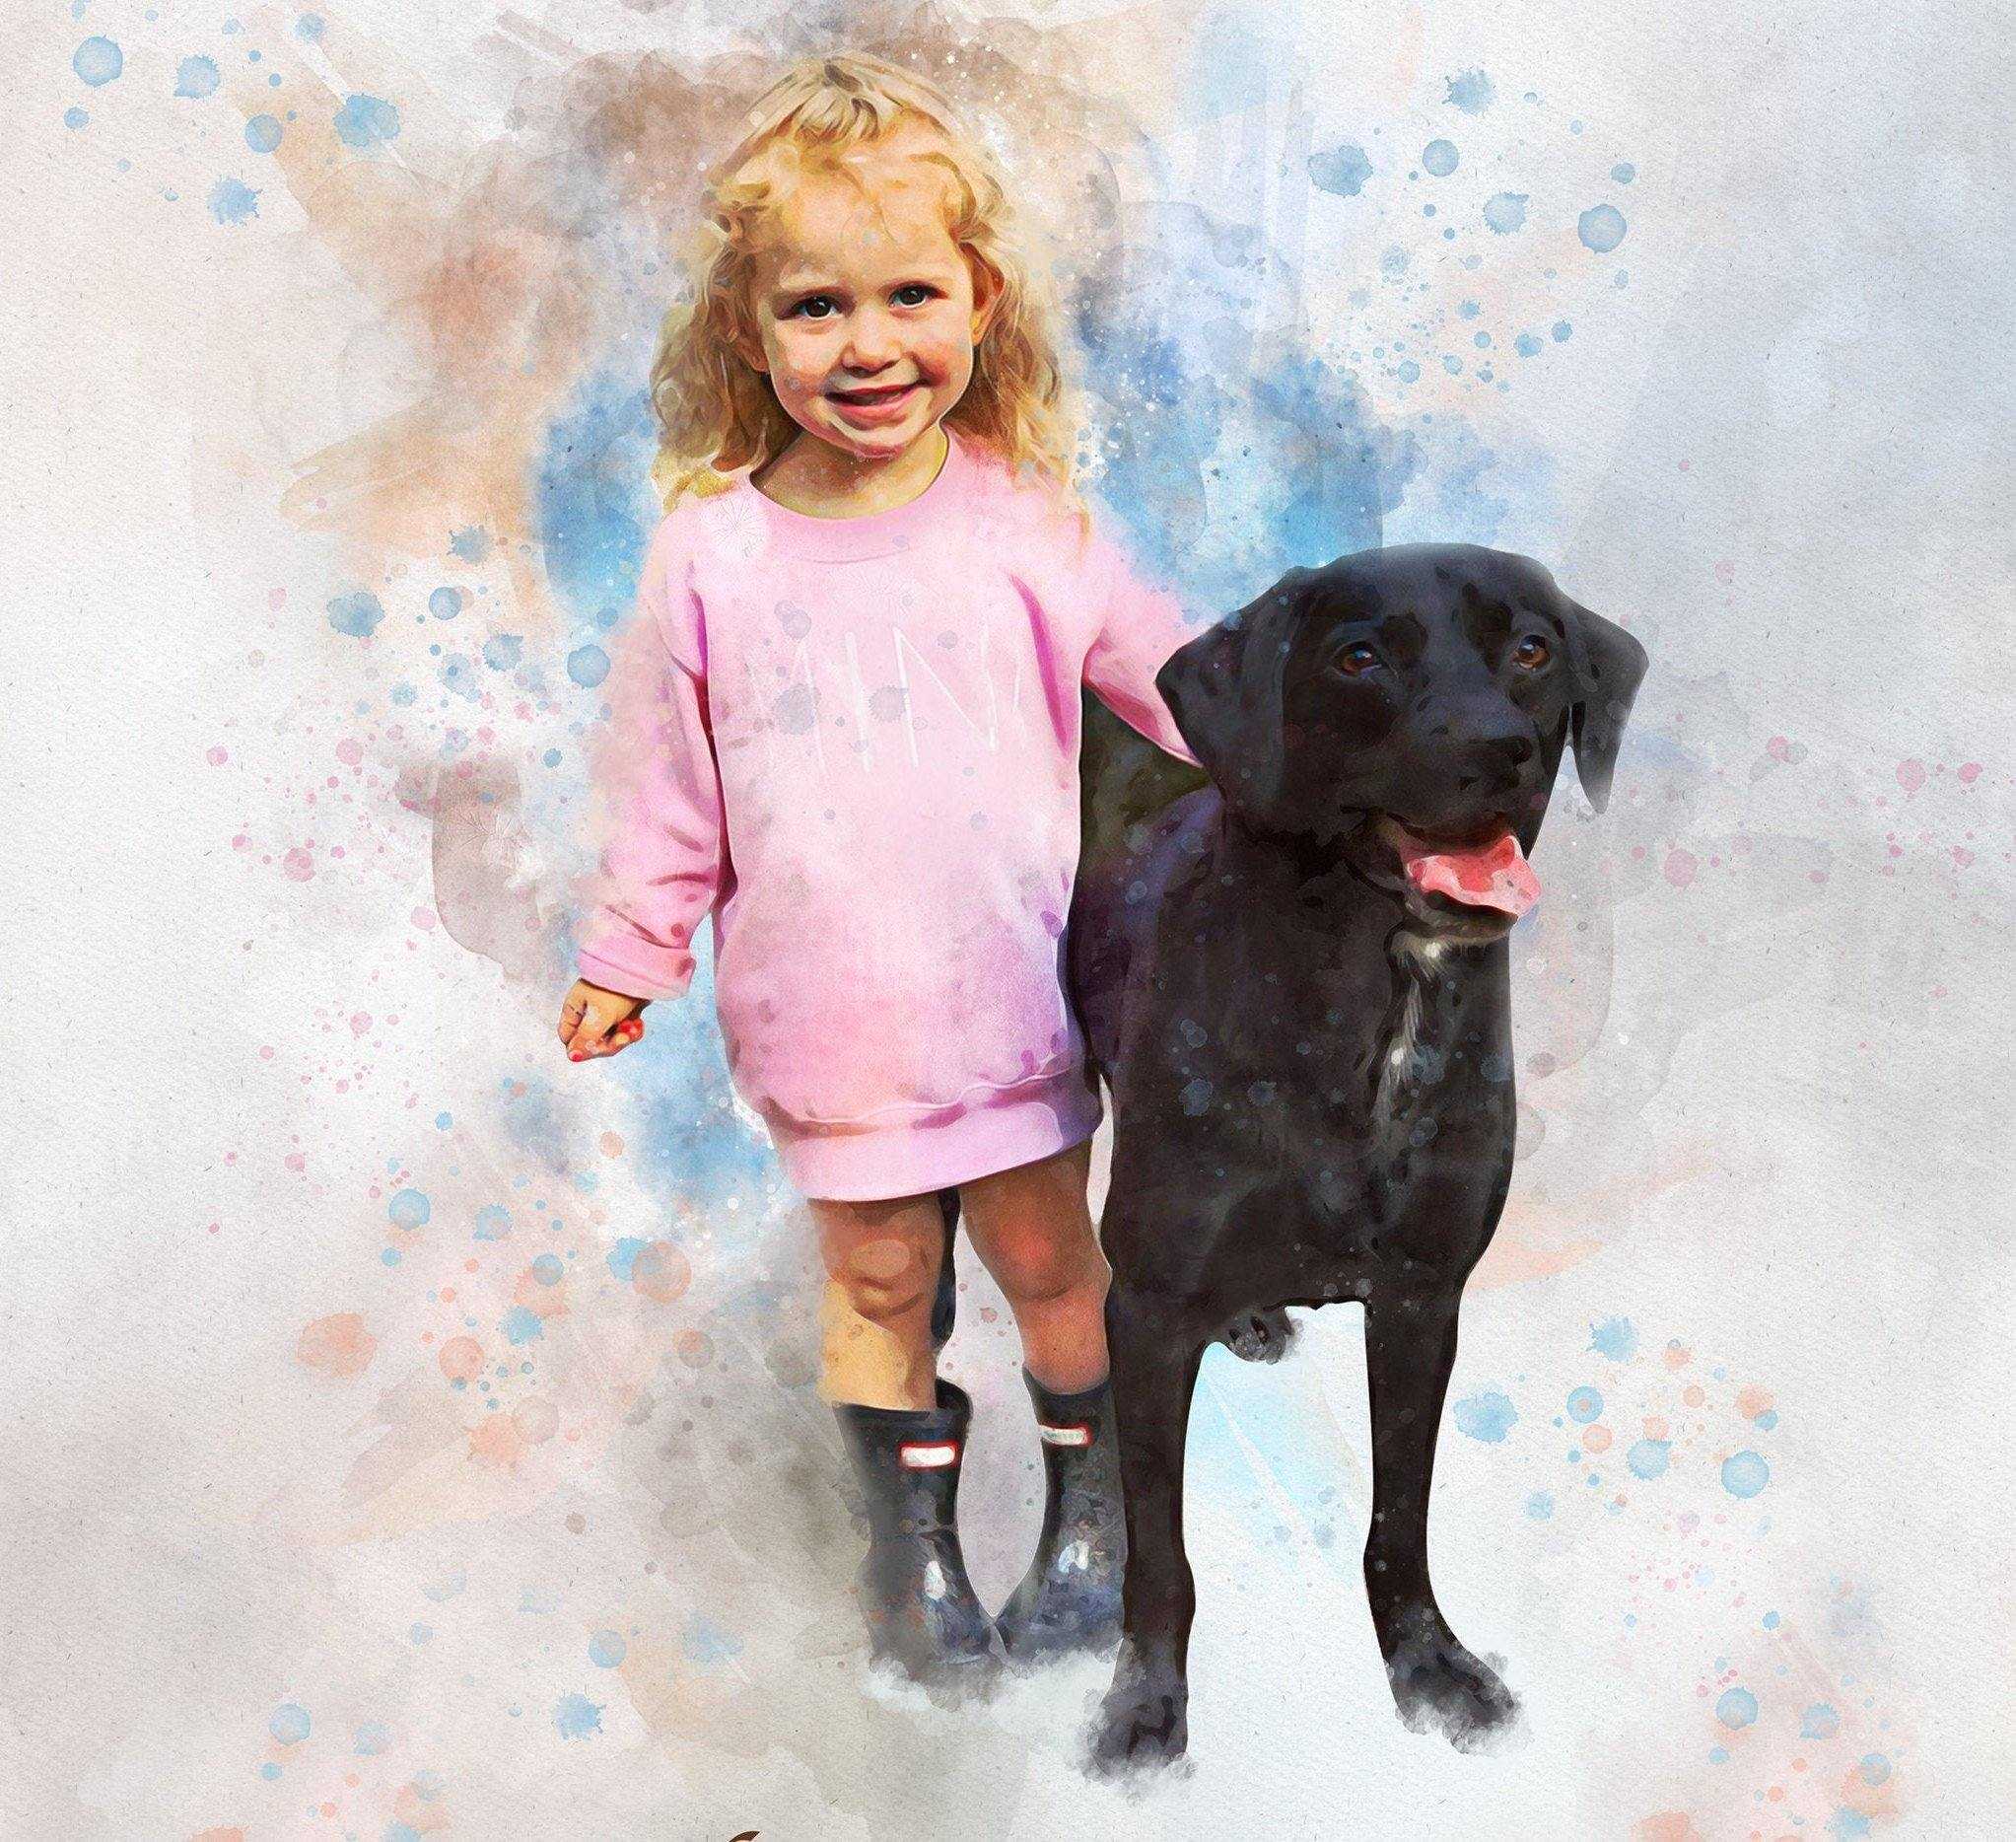 Personalized Dog Painting on Canvas, Custom Watercolor Dog Portrait - FromPicToArt